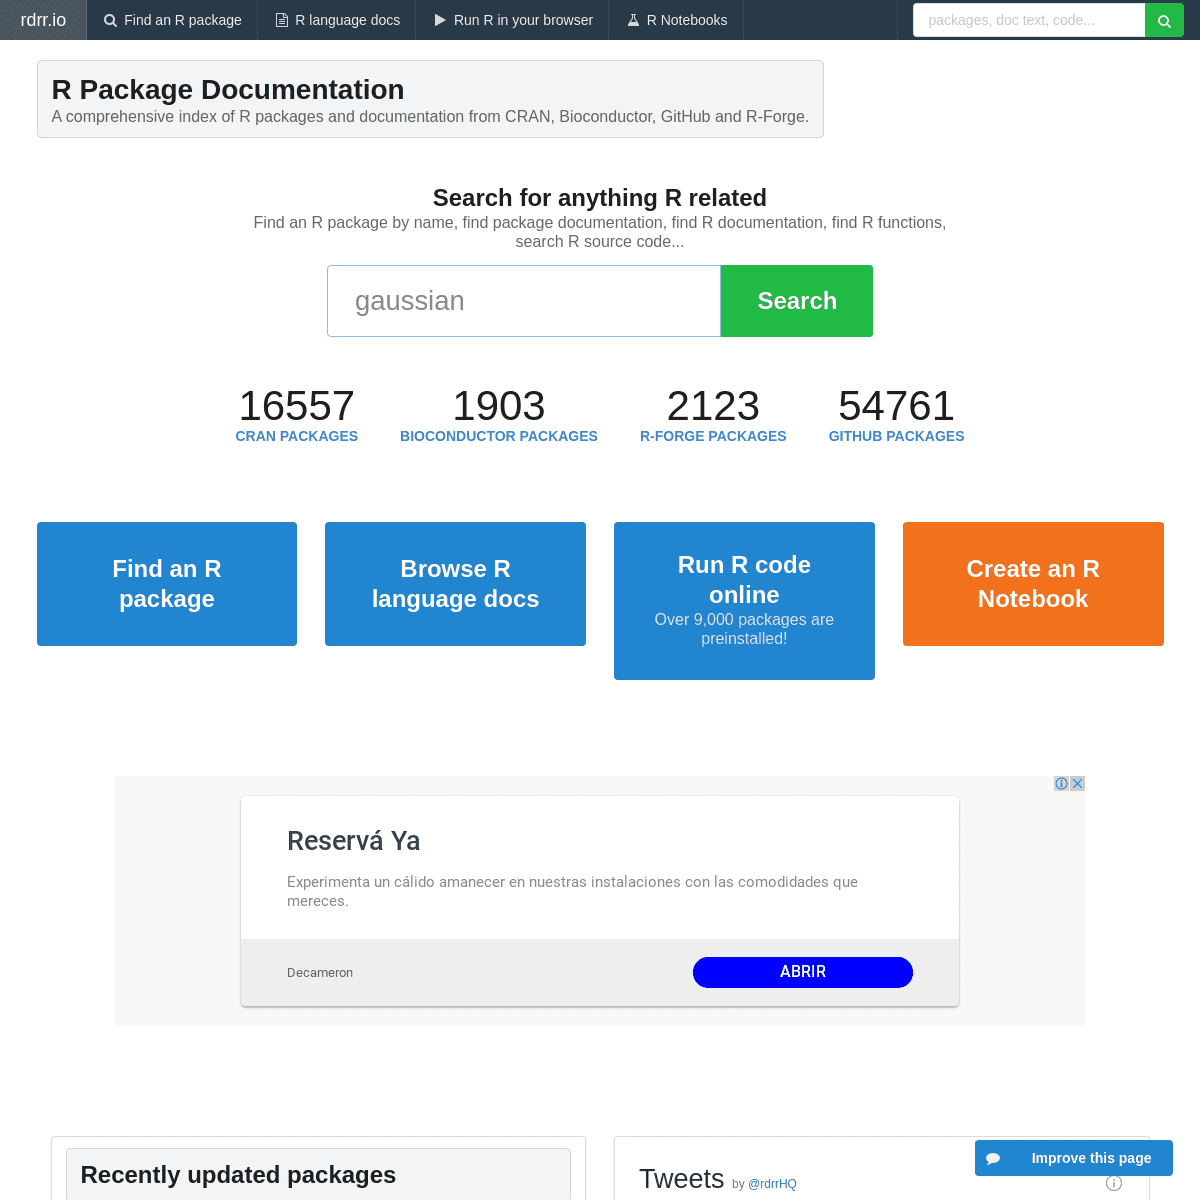 A complete backup of rdrr.io